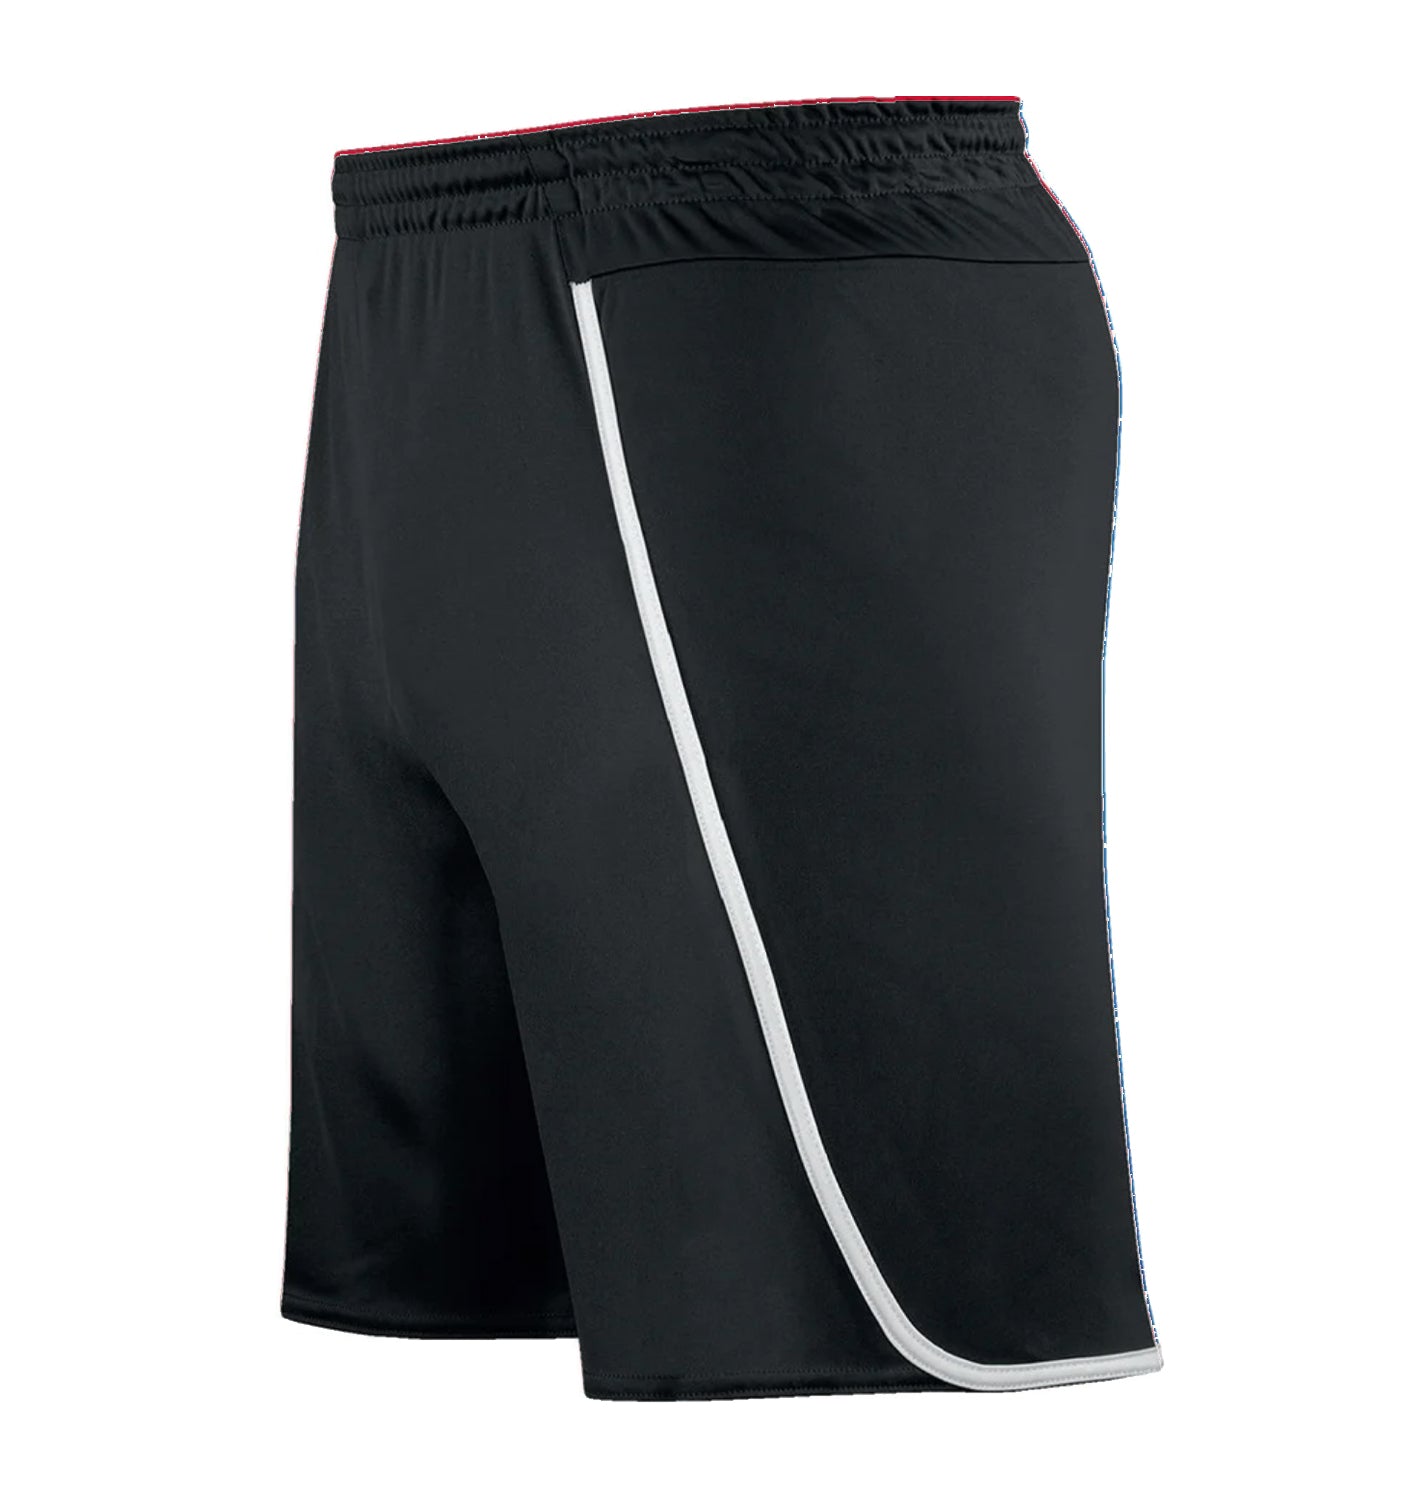 Pacific Soccer Shorts - Women - Youth Sports Products